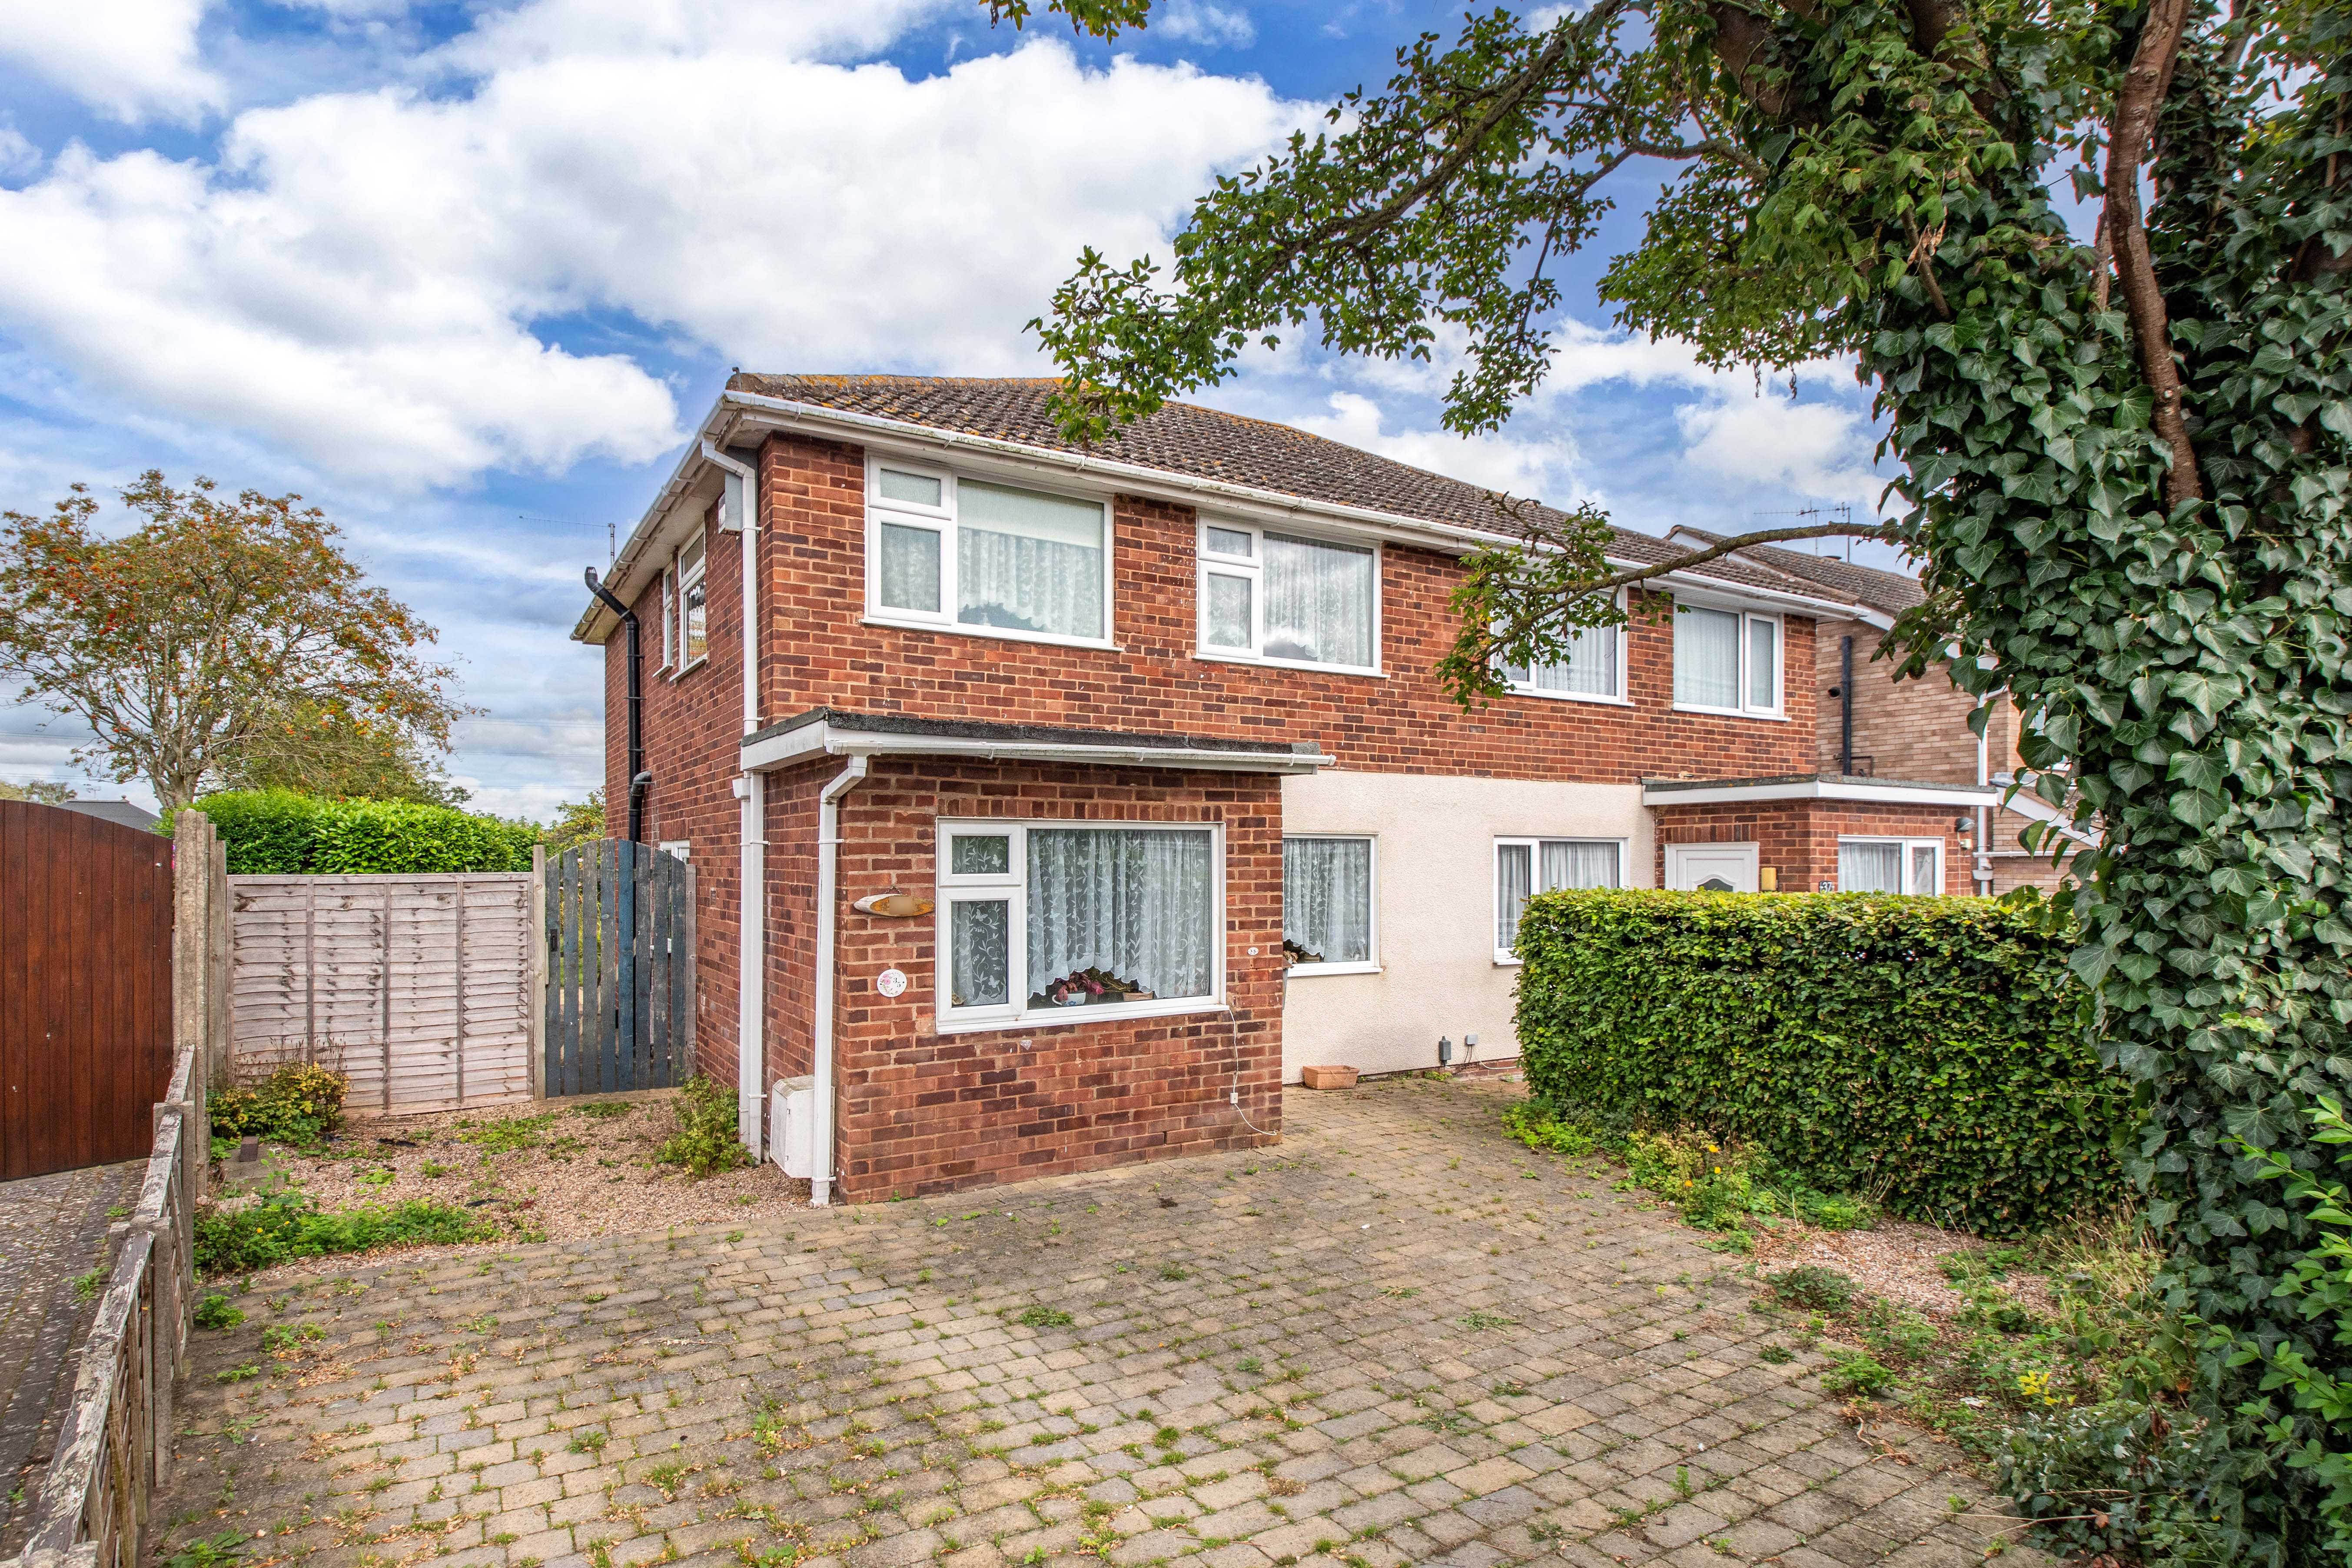 3 bed house for sale in Cloverdale, Stoke Prior  - Property Image 1